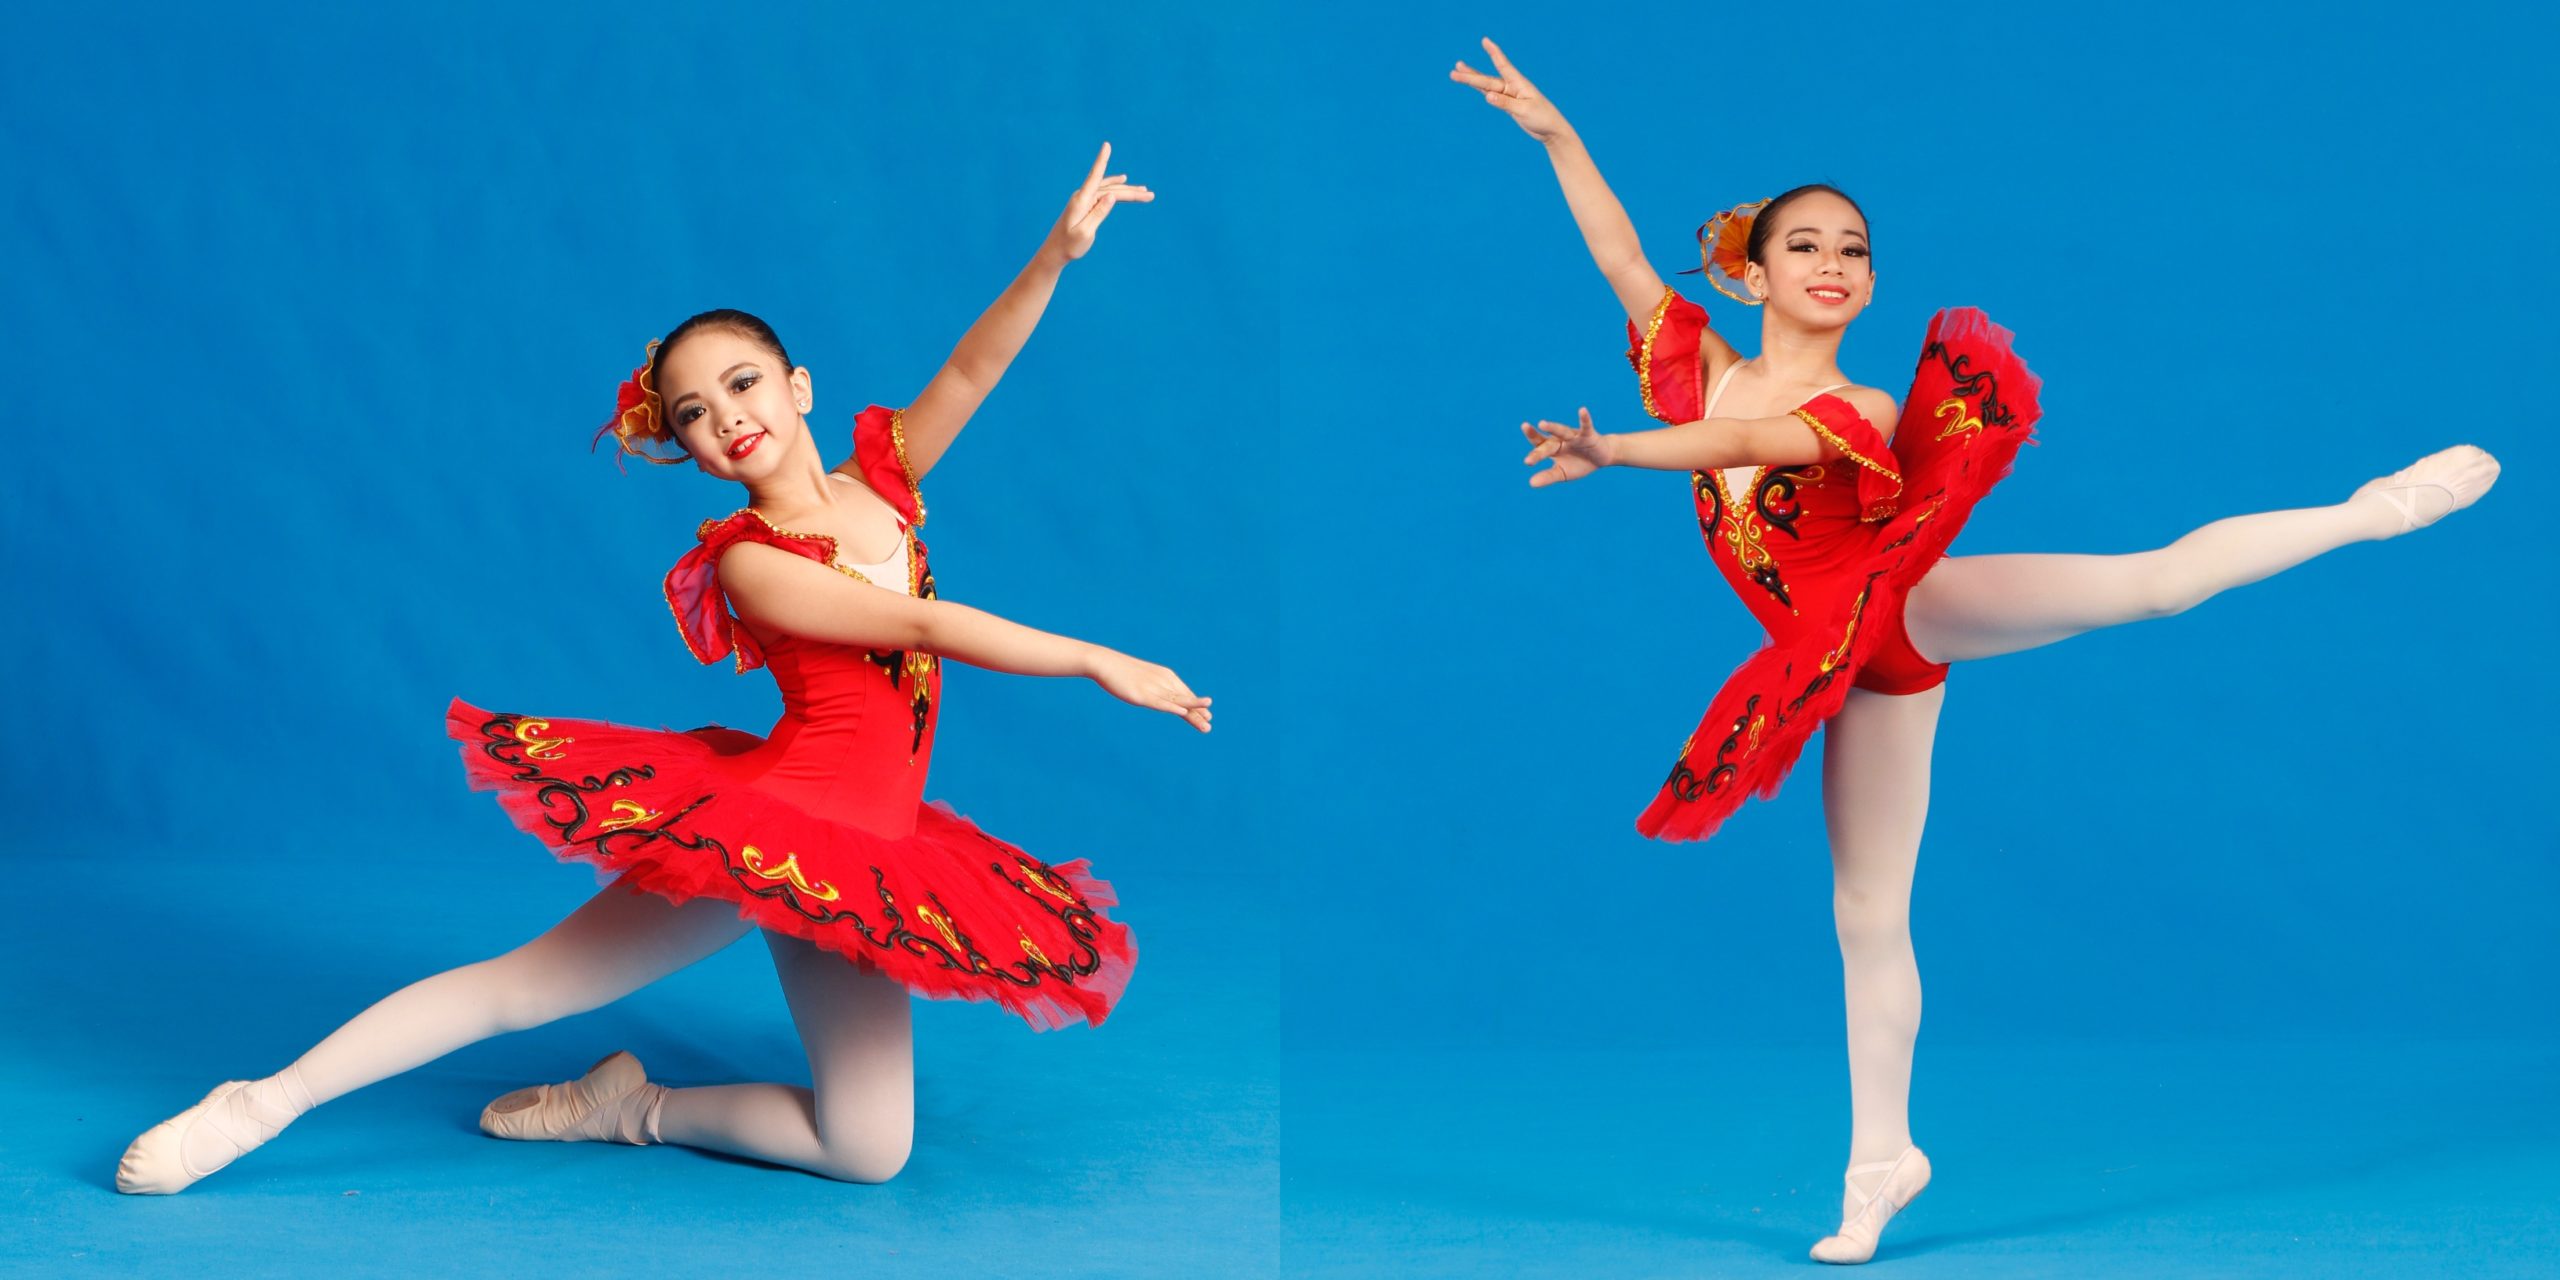 Young Filipino ballet dancers represent in Stars of Canaan Dance Online Ballet Competition amid COVID-19 pandemic